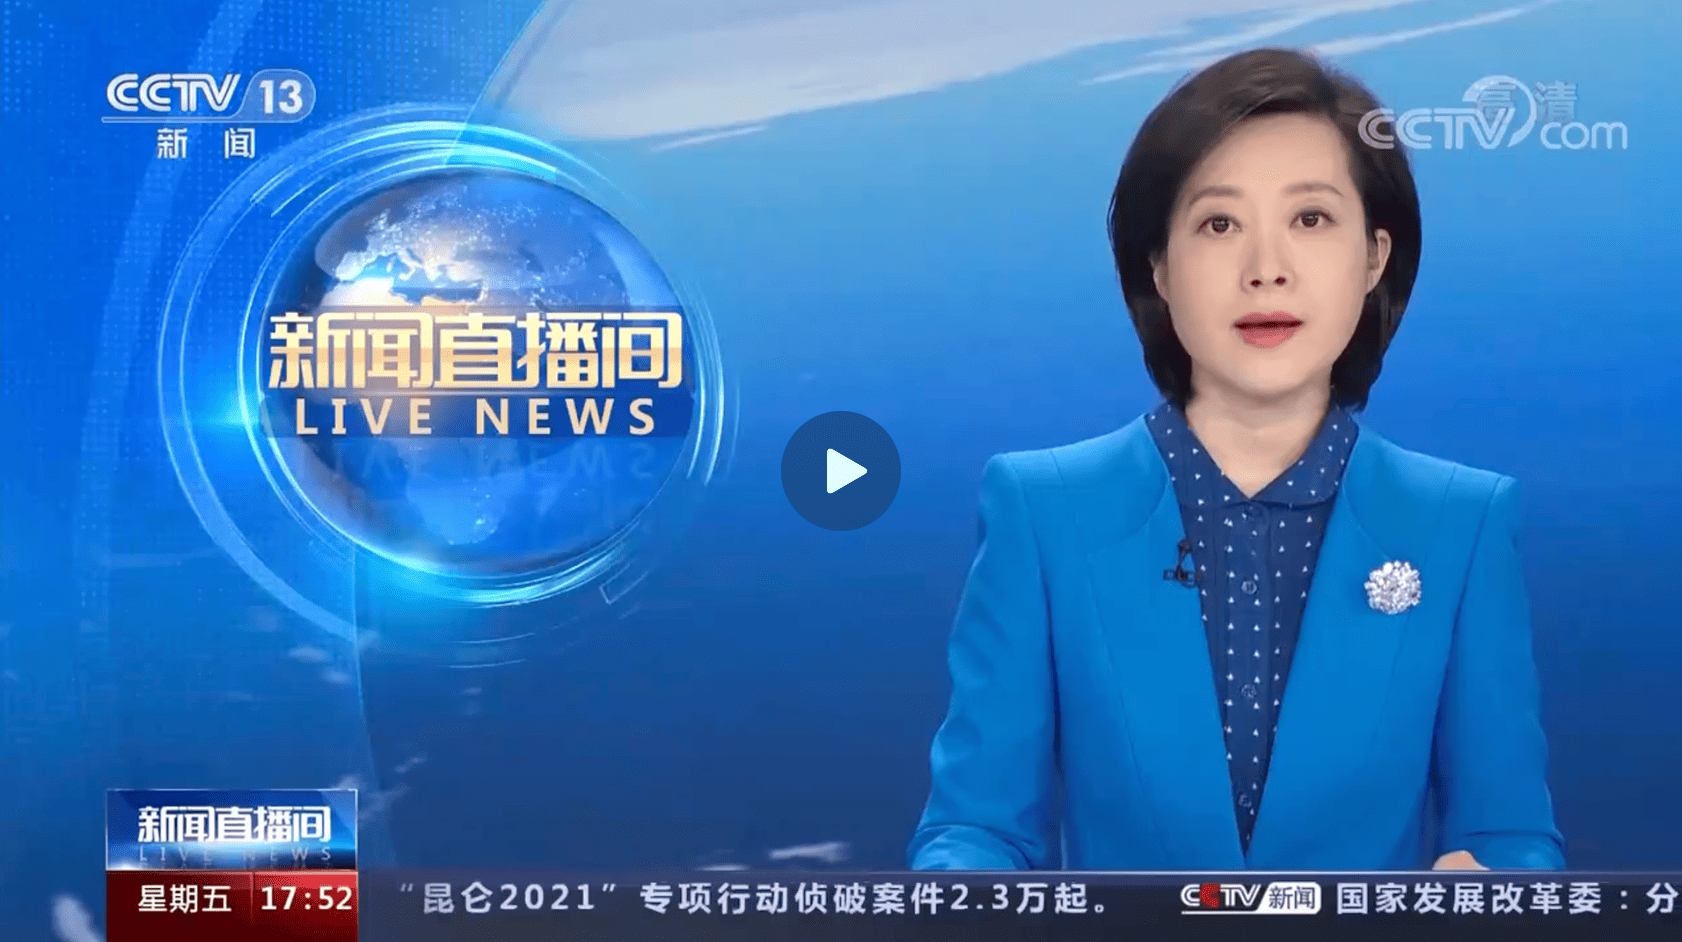 [Live news] Reportage from the channel CCTV